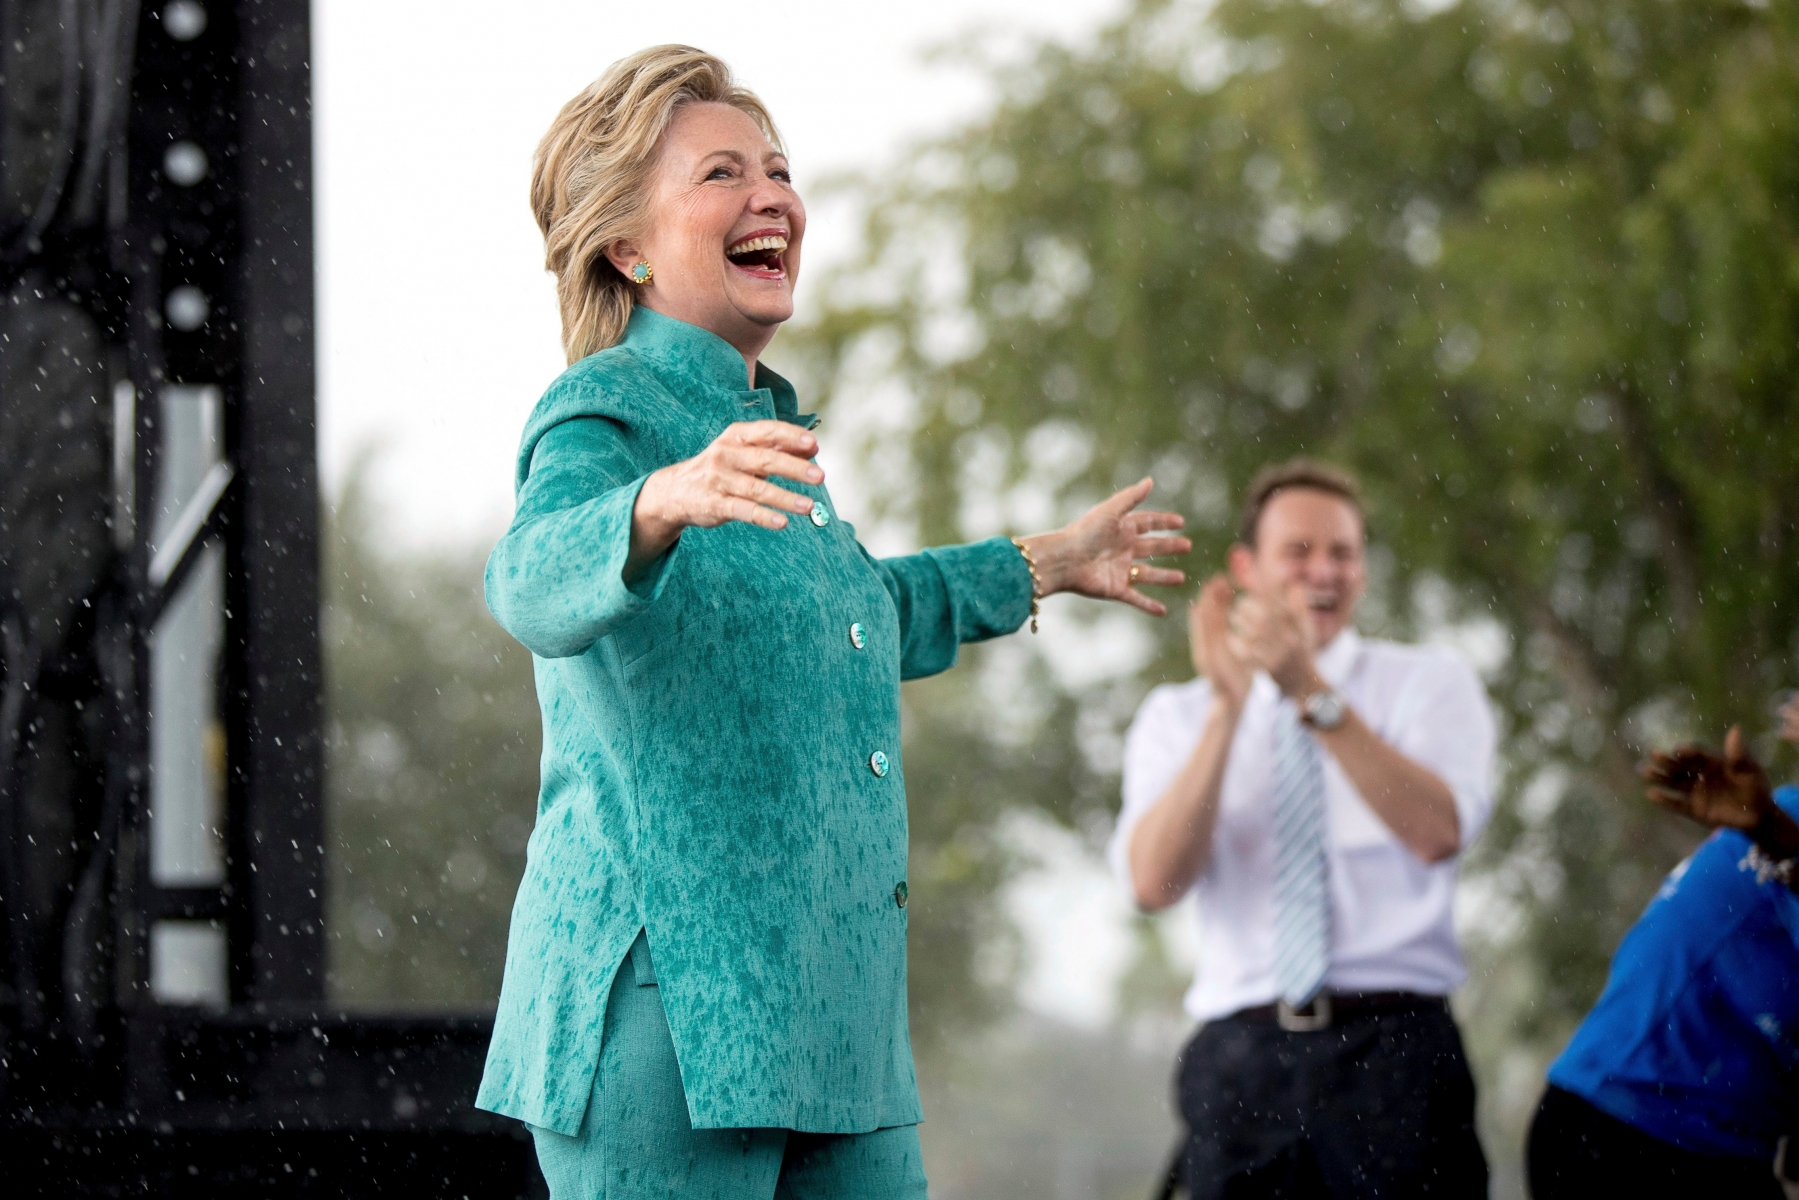 Democratic presidential candidate Hillary Clinton smiles as she cuts her speech short due to rain at a rally at C.B. Smith Park in Pembroke Pines, Fla., Saturday, Nov. 5, 2016. (AP Photo/Andrew Harnik) Campaign 2016 Clinton